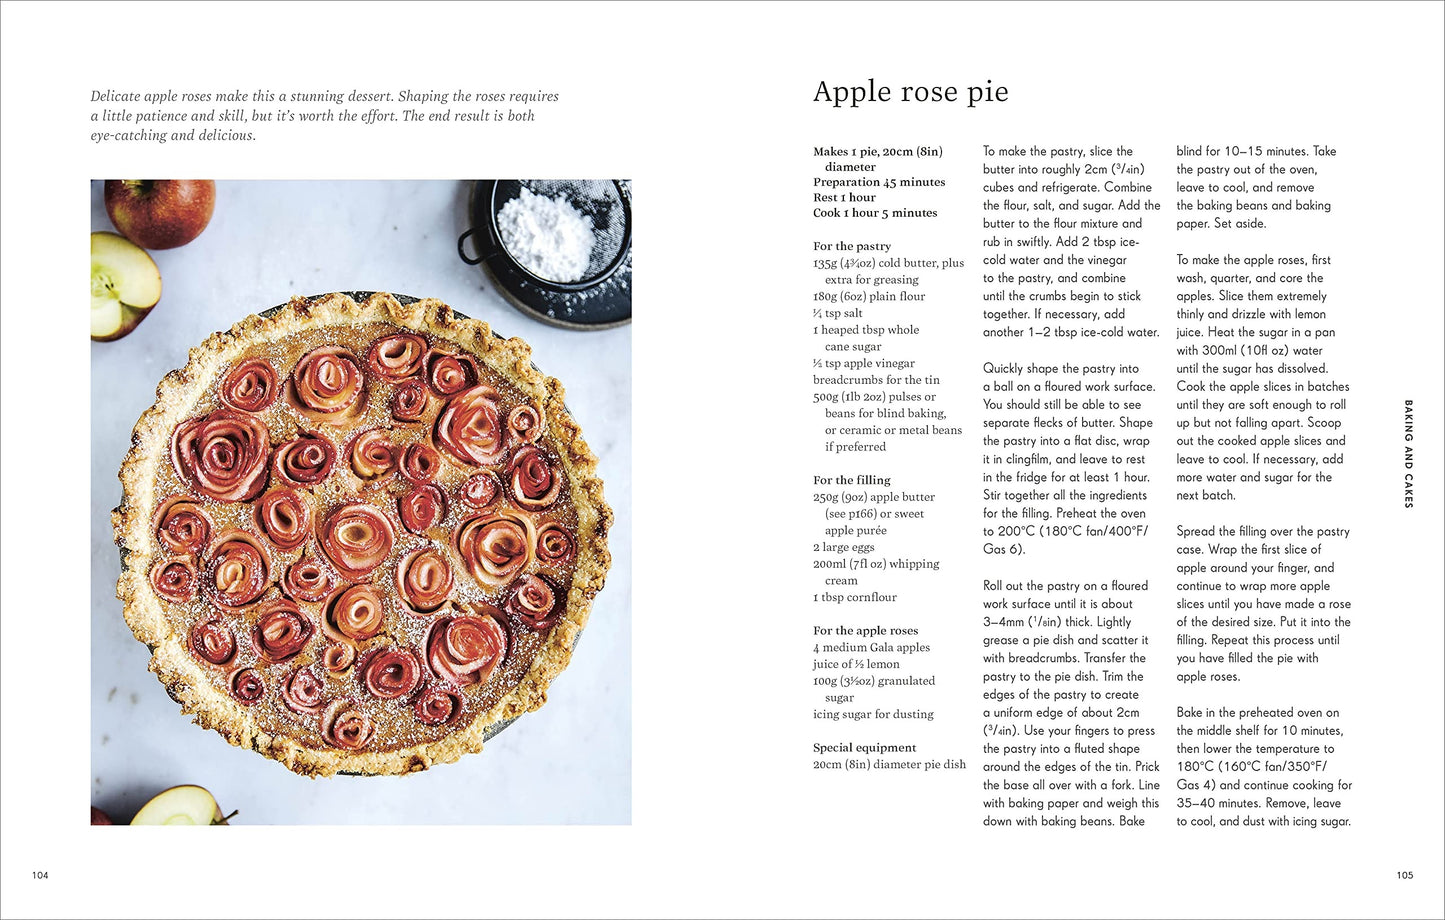 Apple Kitchen: From Tree to Table – Over 70 Inspiring Recipes